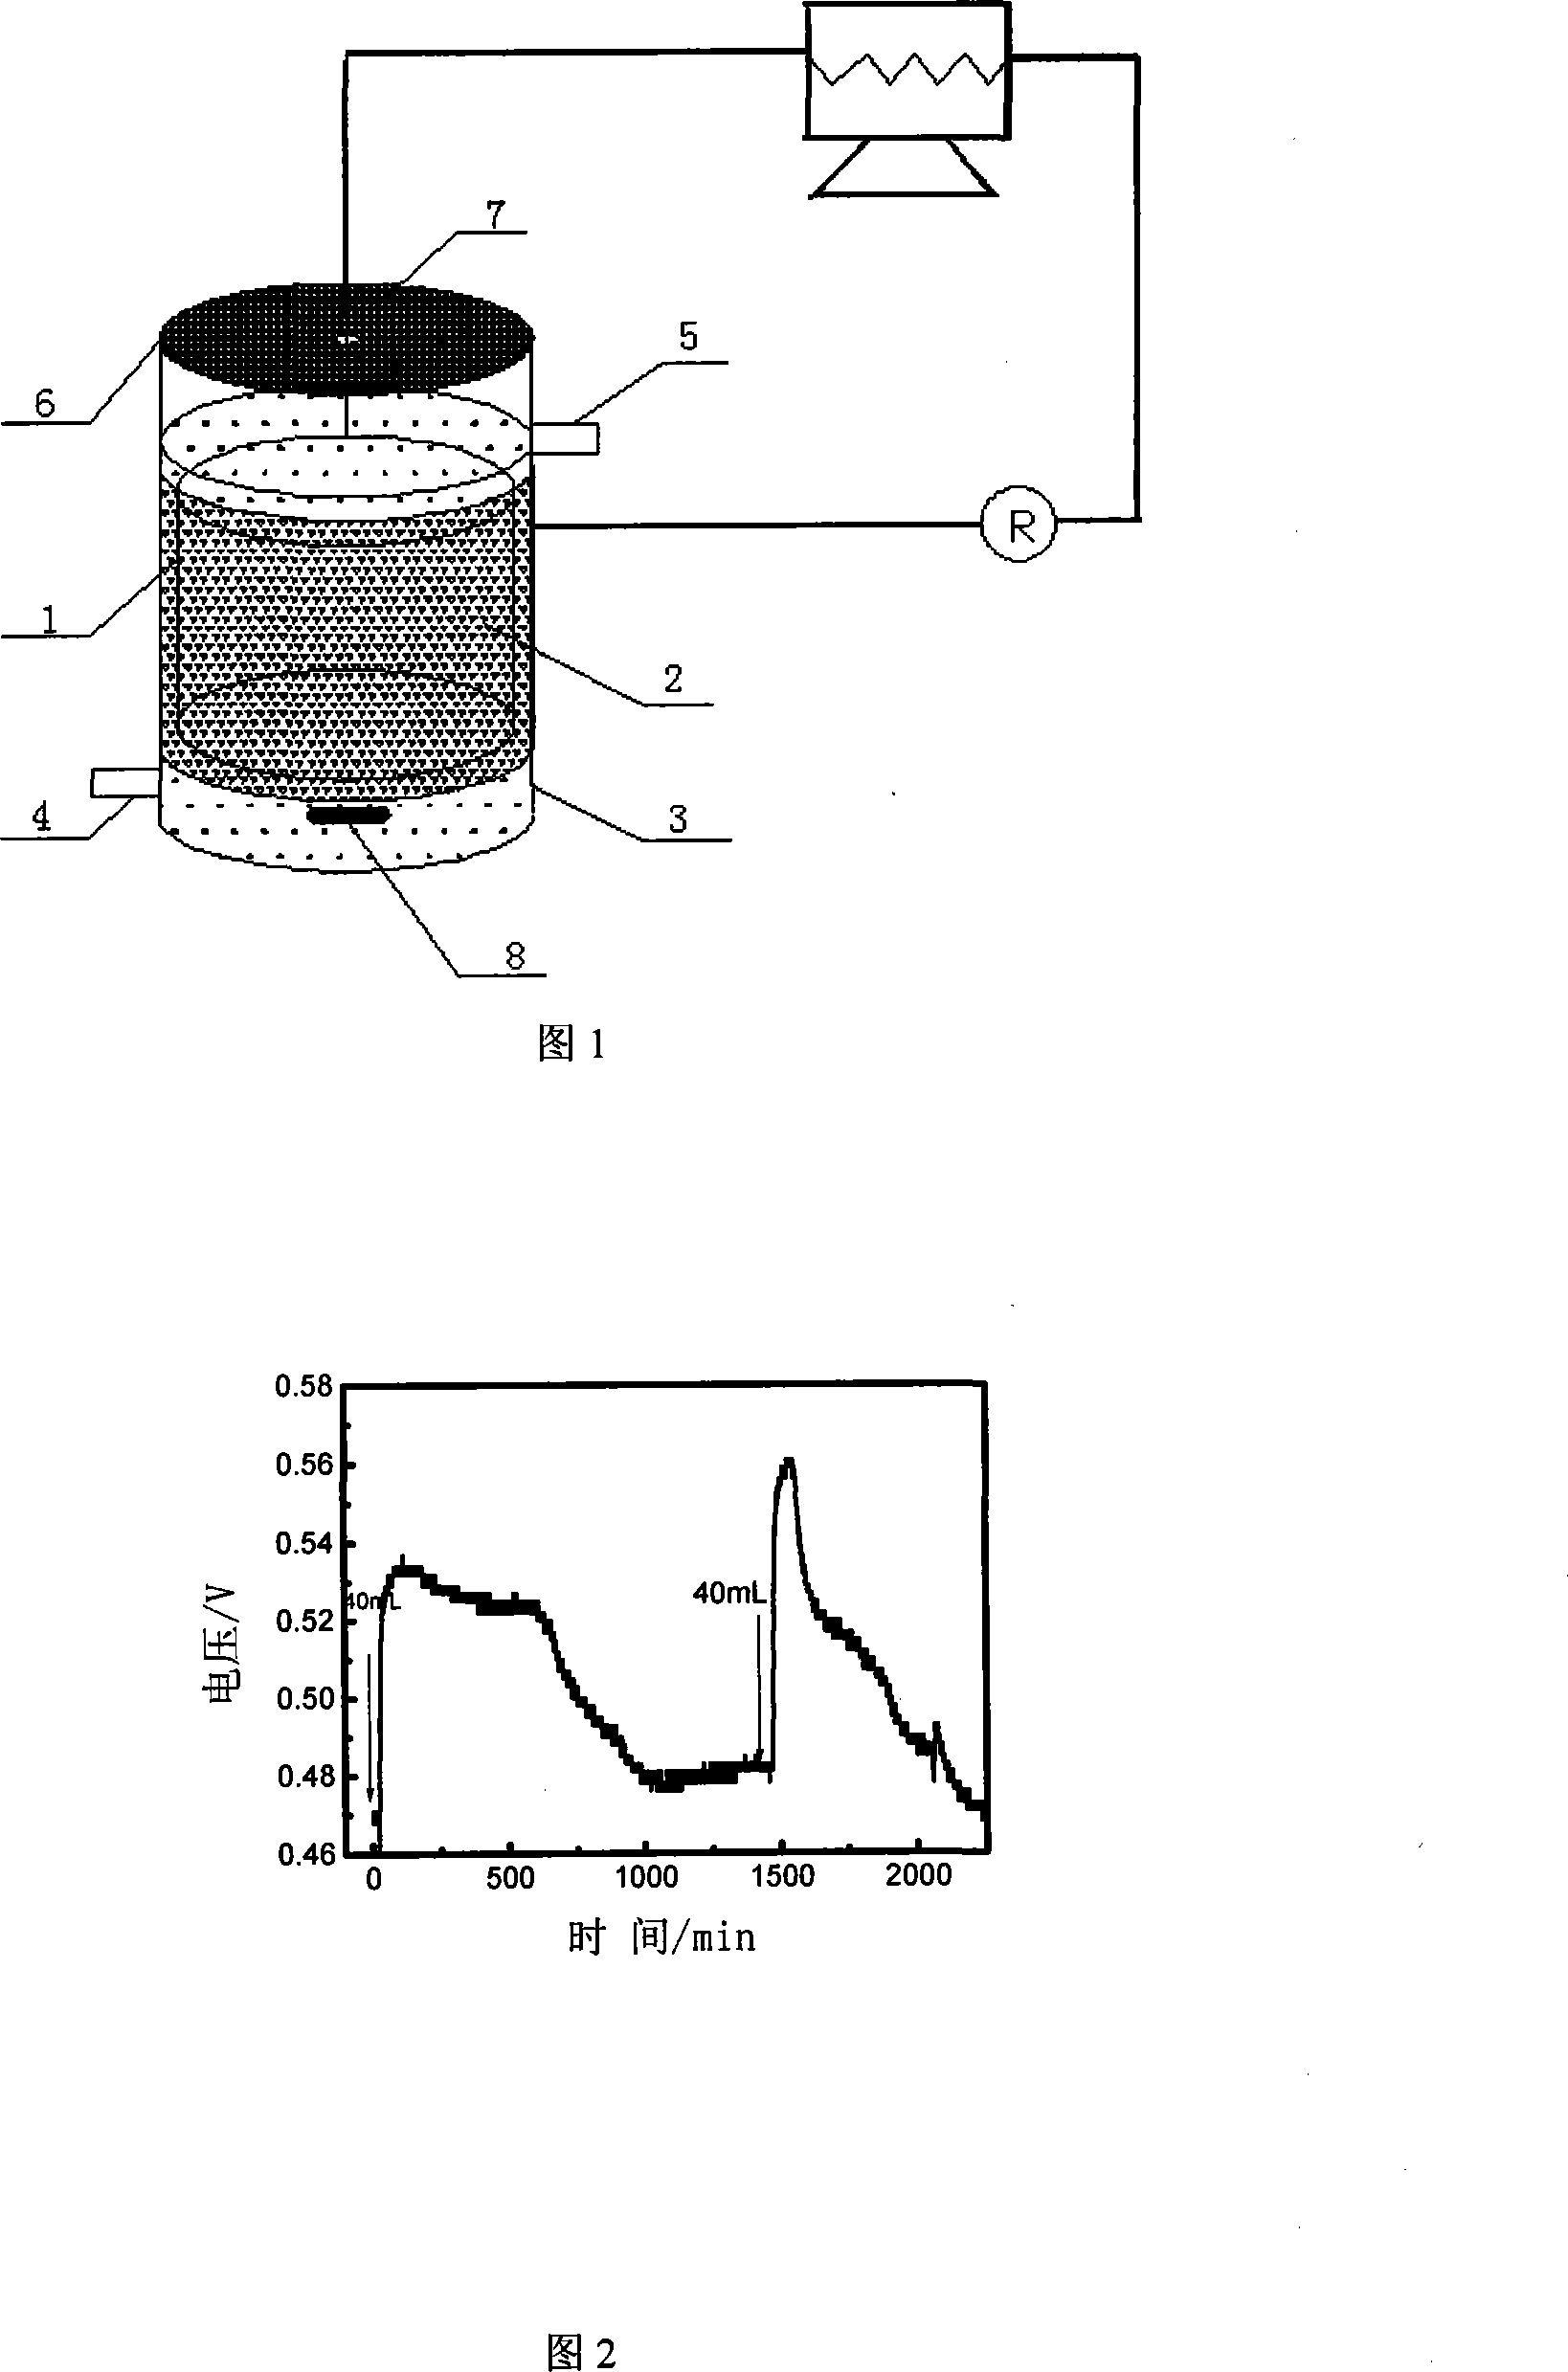 Single microbiological fuel cell with gaseous diffusion electrode as cathode